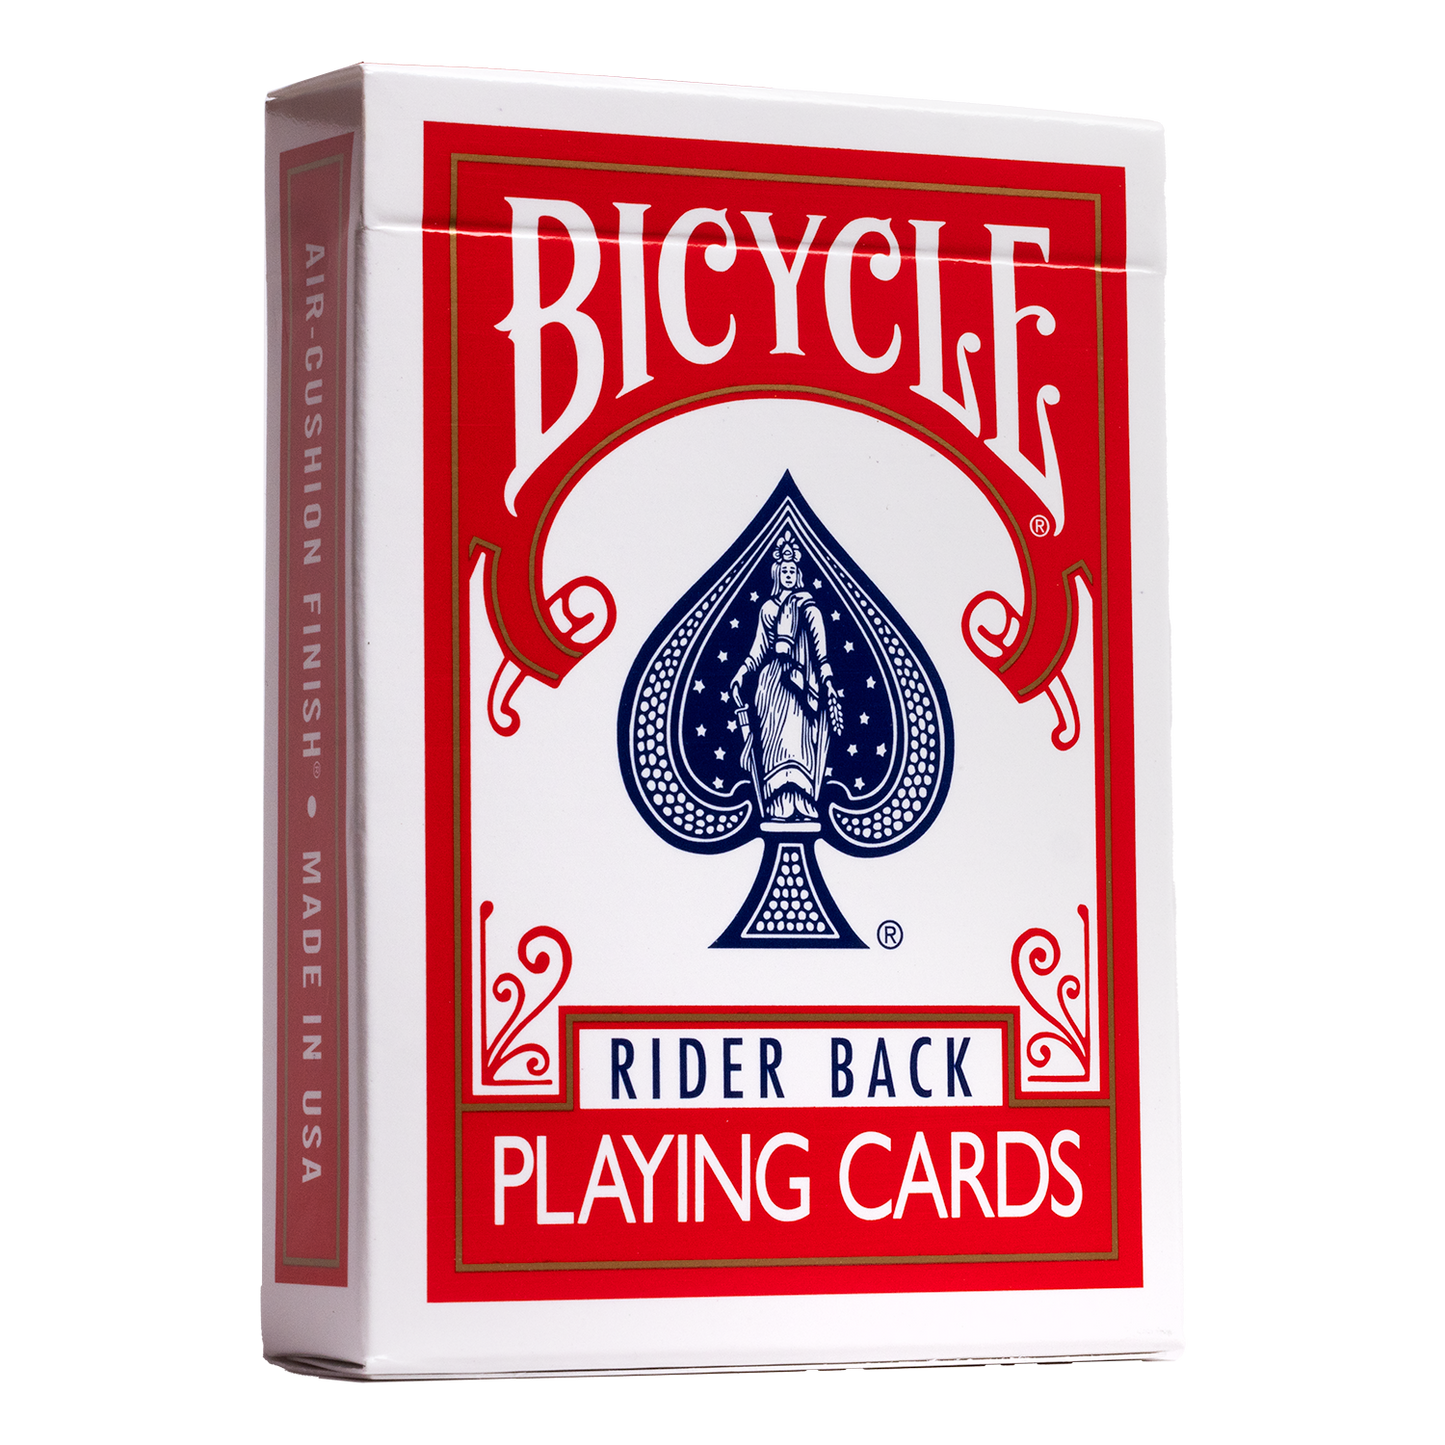 Bicycle Rider Back x Butterfly Marked Deck